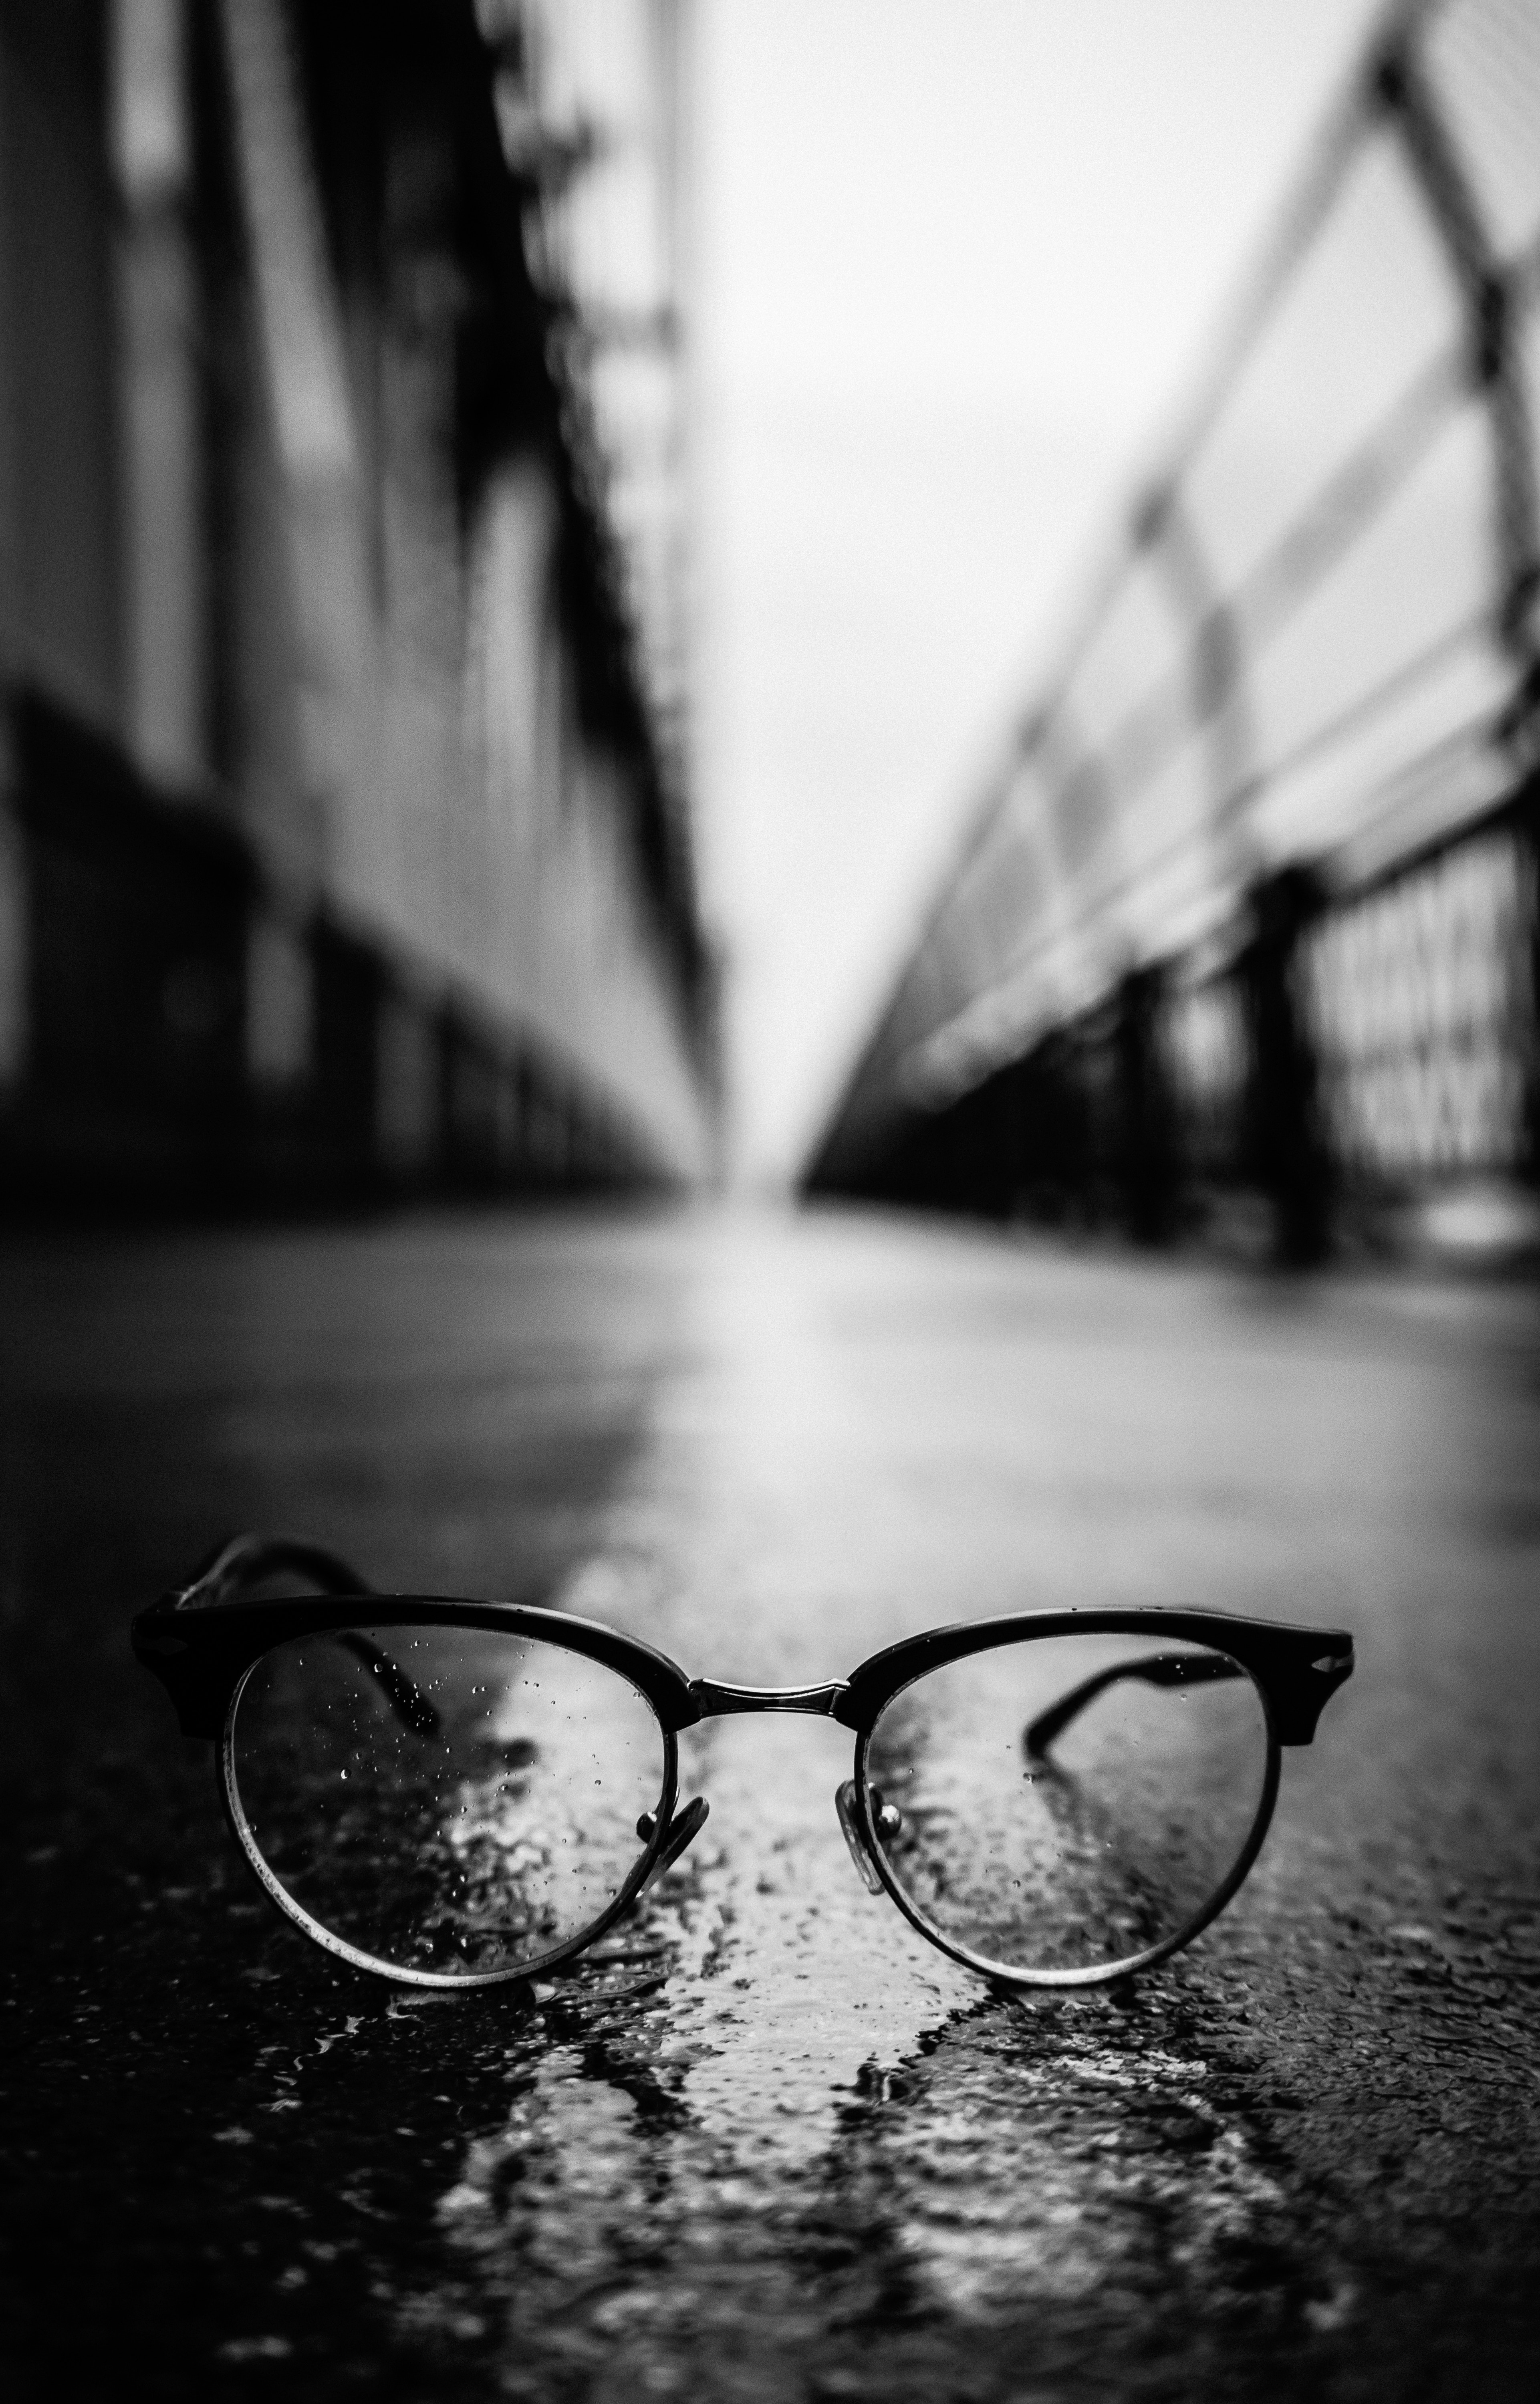 bw, close up, dark, chb, glasses, spectacles phone background